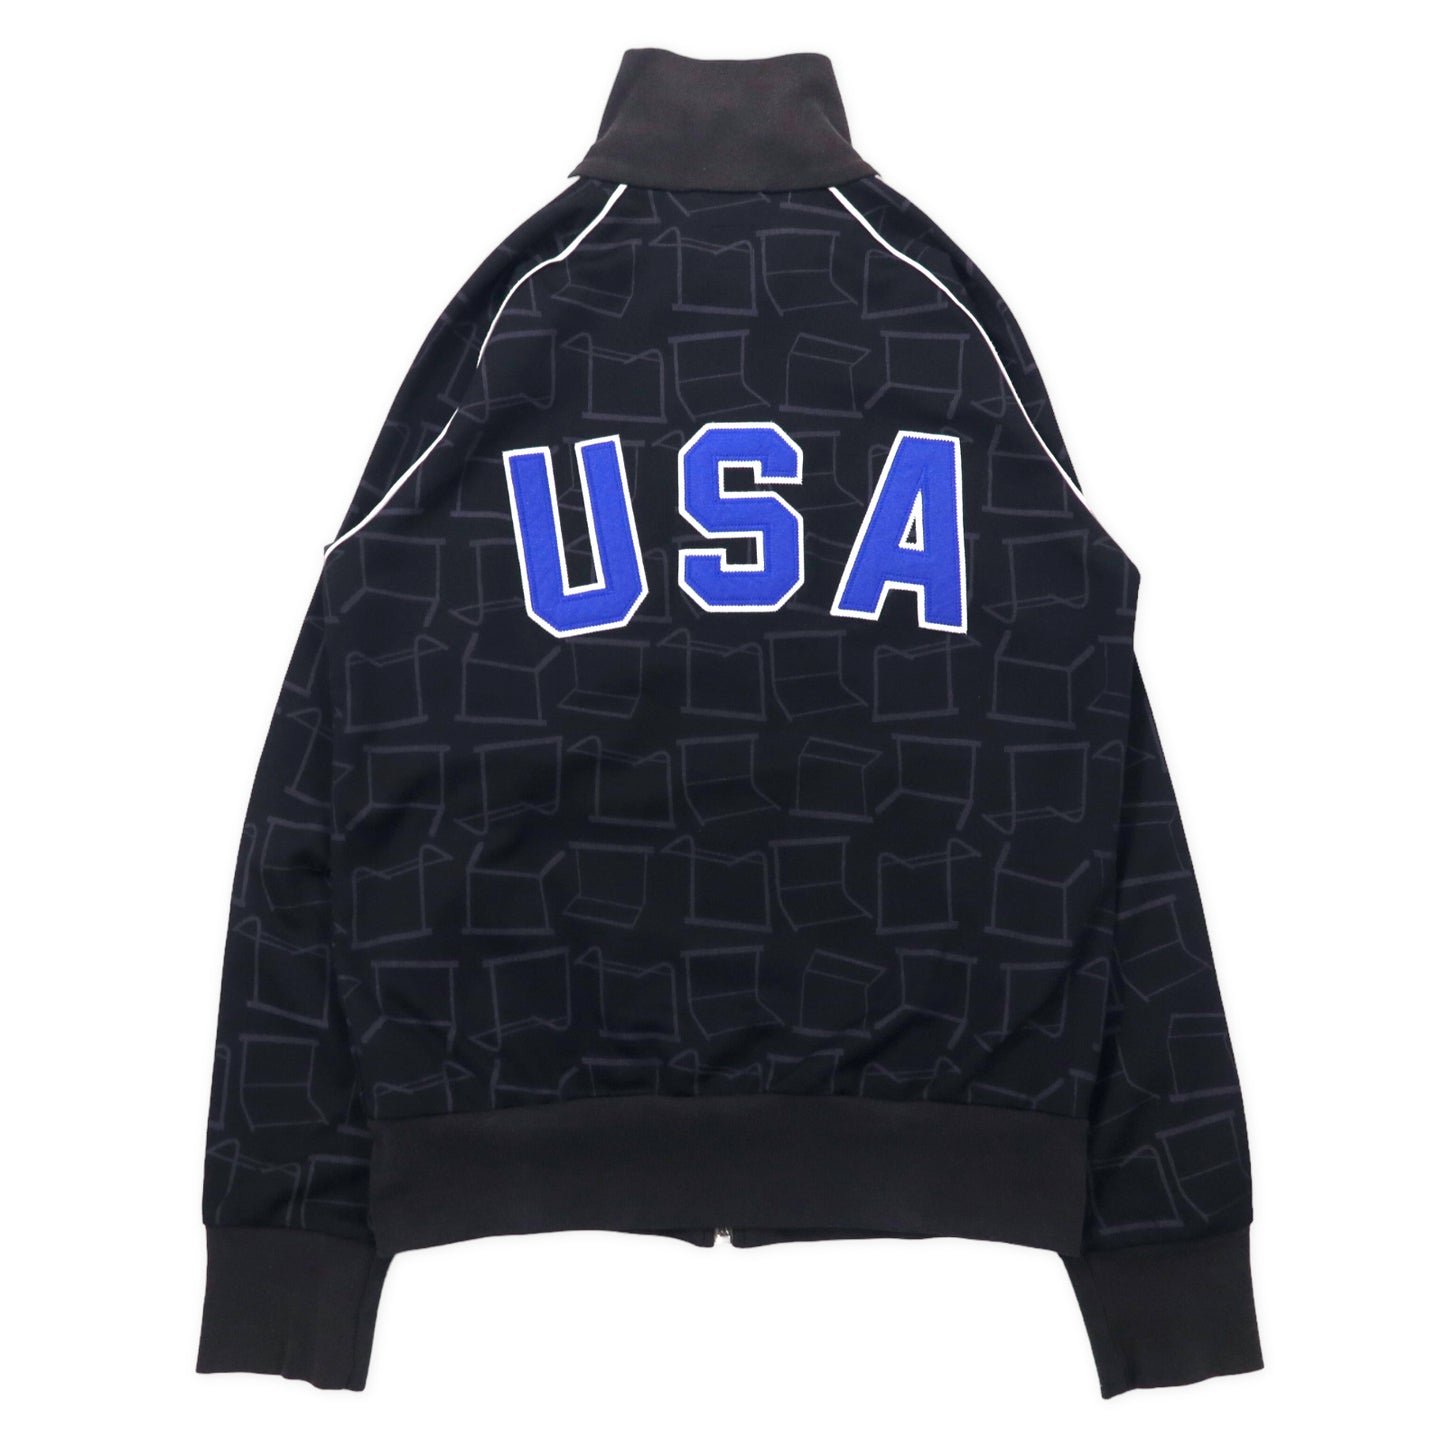 Adidas Originals 00s TRACK JACKET Jersey M Black Polyester USA Patterned 3  Striped Truffle Logo Embroidery